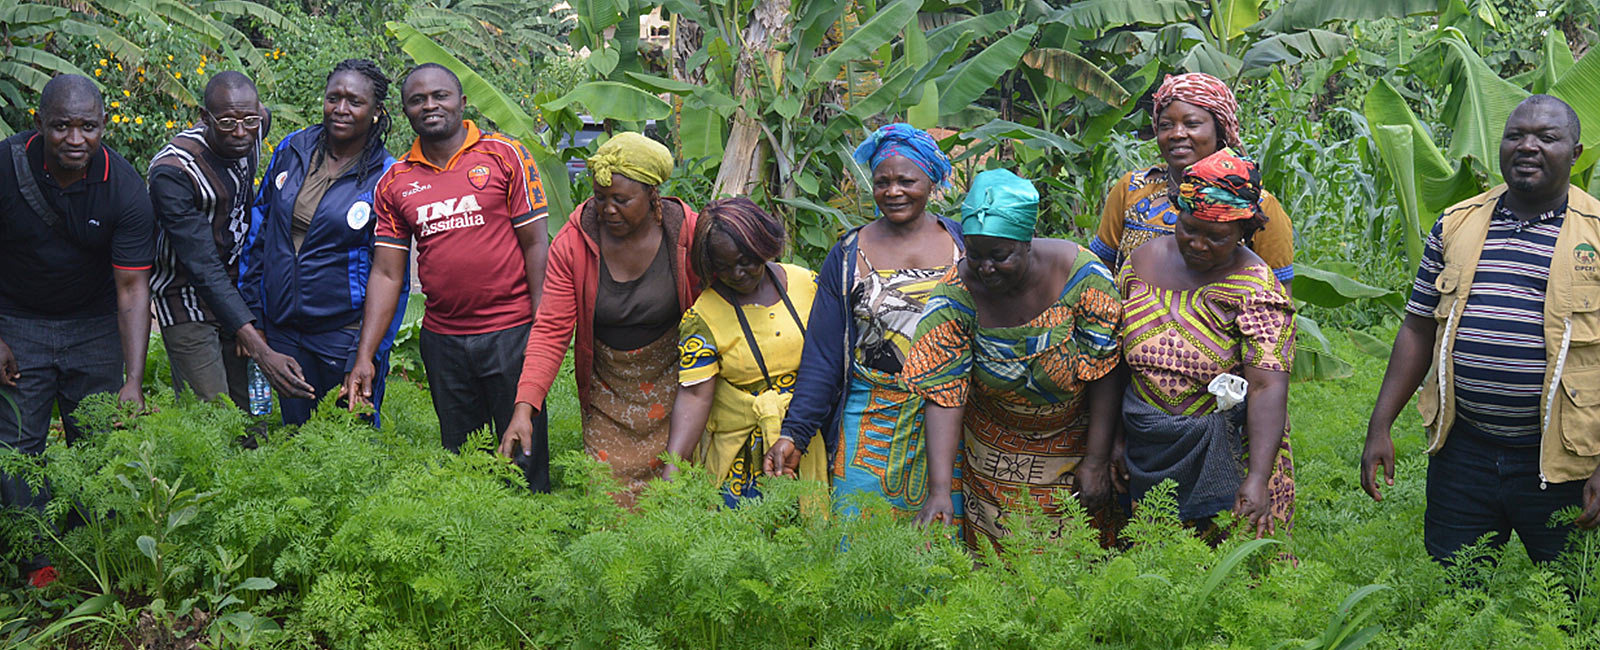 Ecological Organic Agriculture Leadership Course in Africa: Connecting Leaders Creates New Opportunities